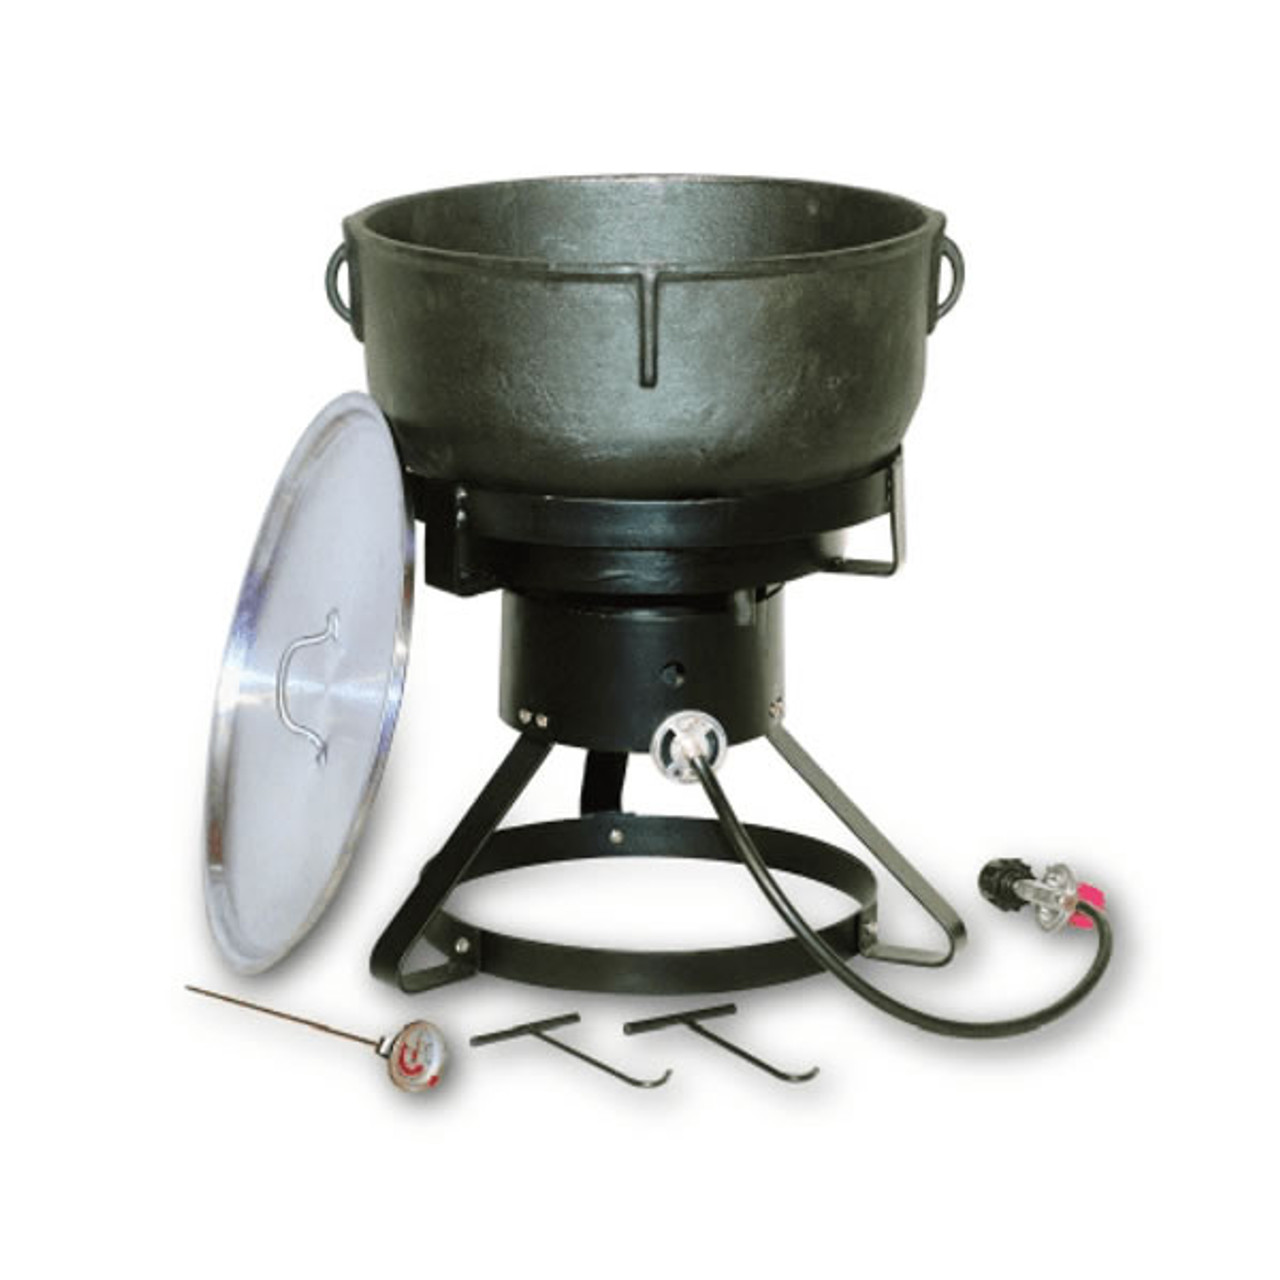 King Kooker Small Cast Iron Pot with 2 Pour Spouts at Tractor